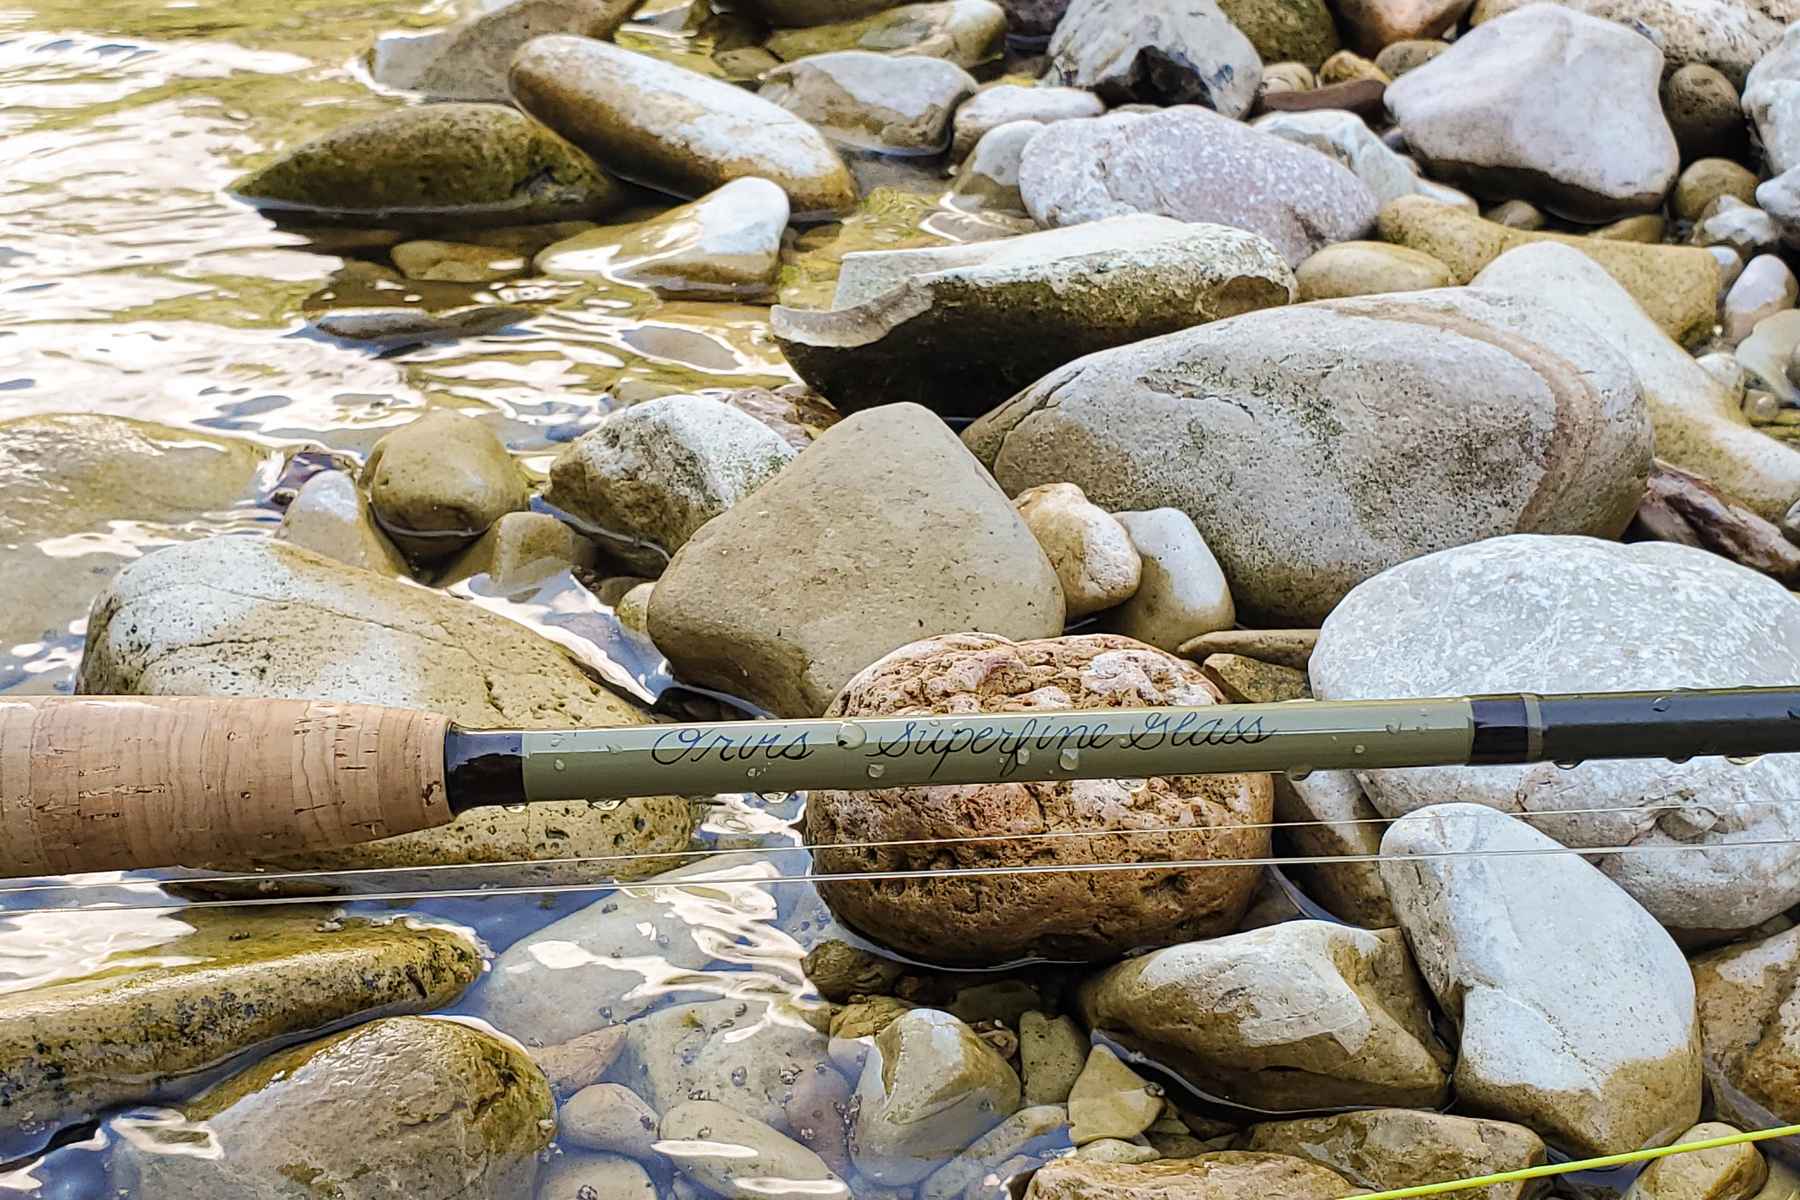 Review: Orvis Superfine Glass fly rod